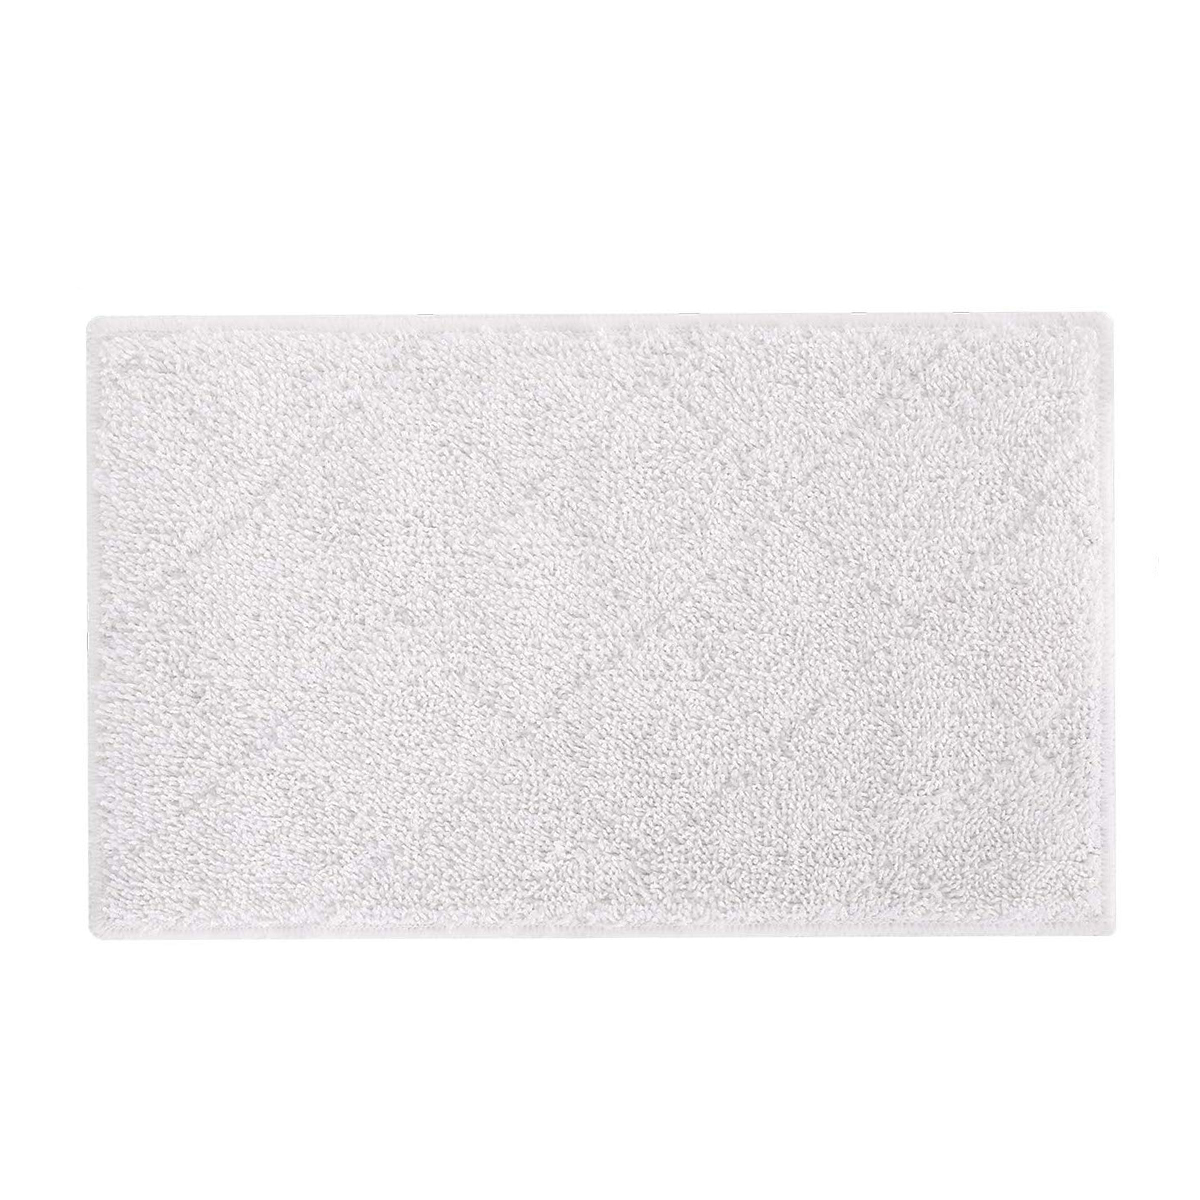 Replacement-Mop-Pad-Cleaning-Cloths-Covers-1590311-1